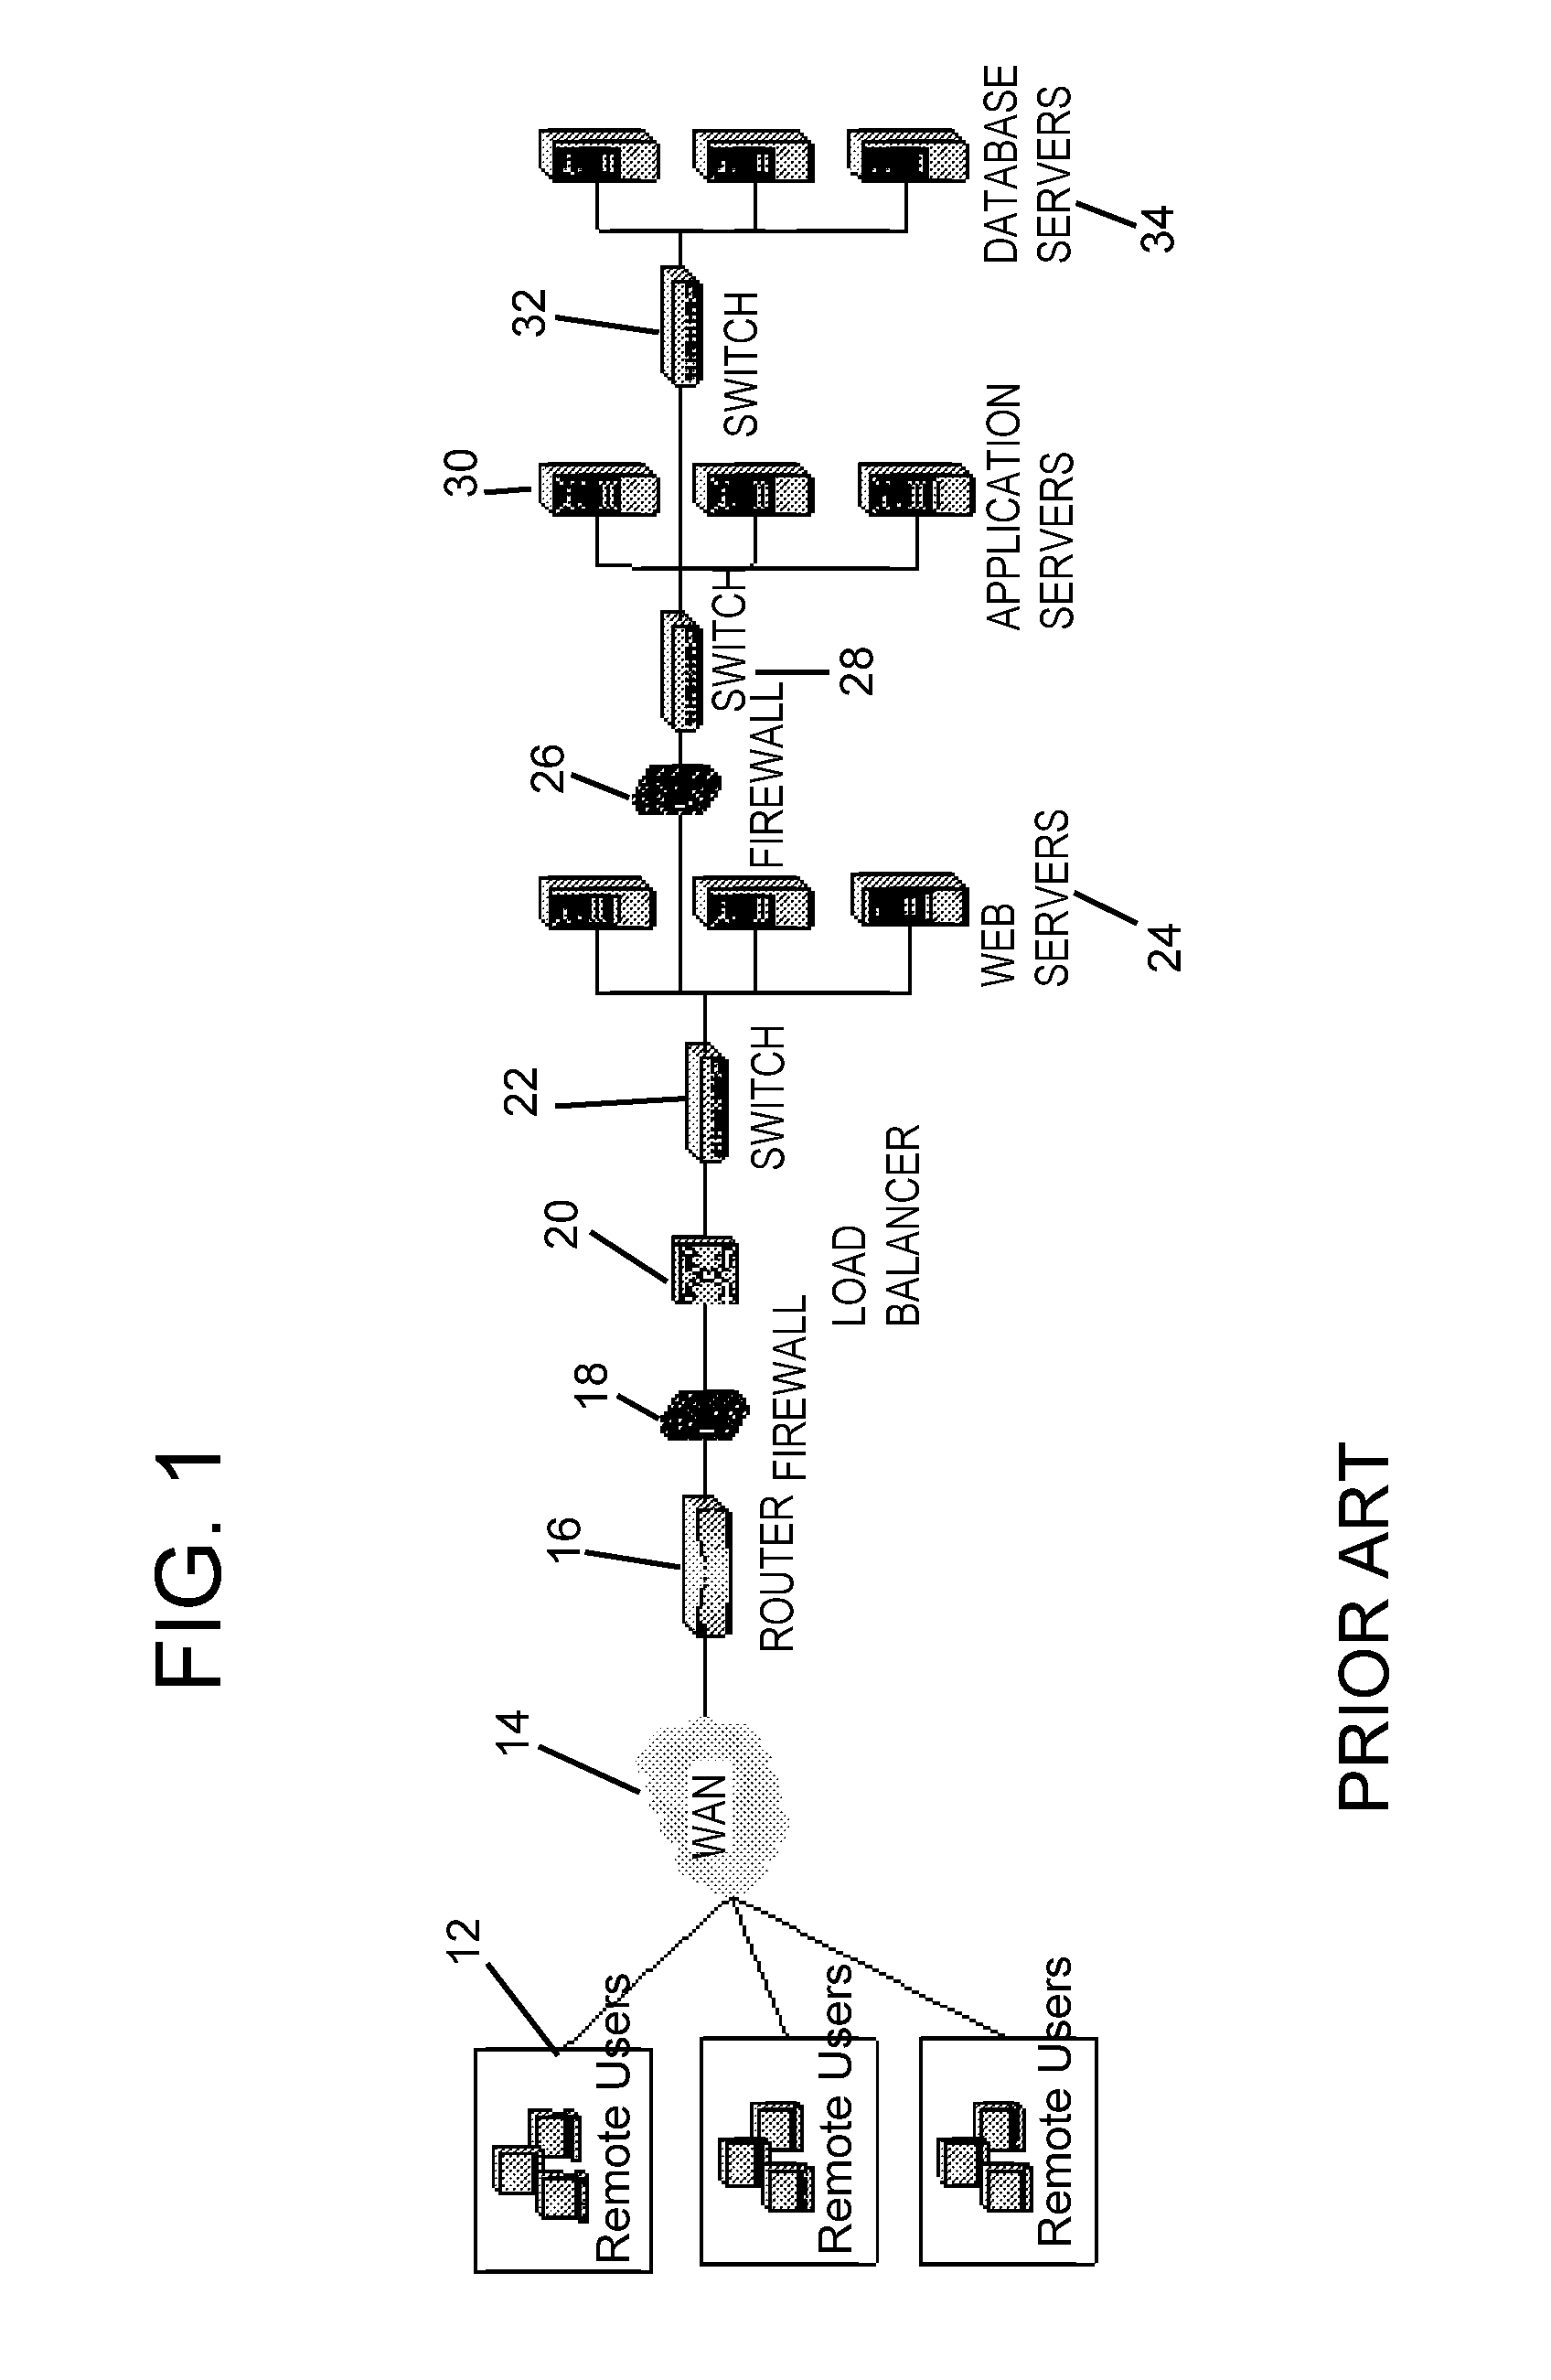 Method and apparatus for the continuous collection and correlation of application transactions across all tiers of an n-tier application